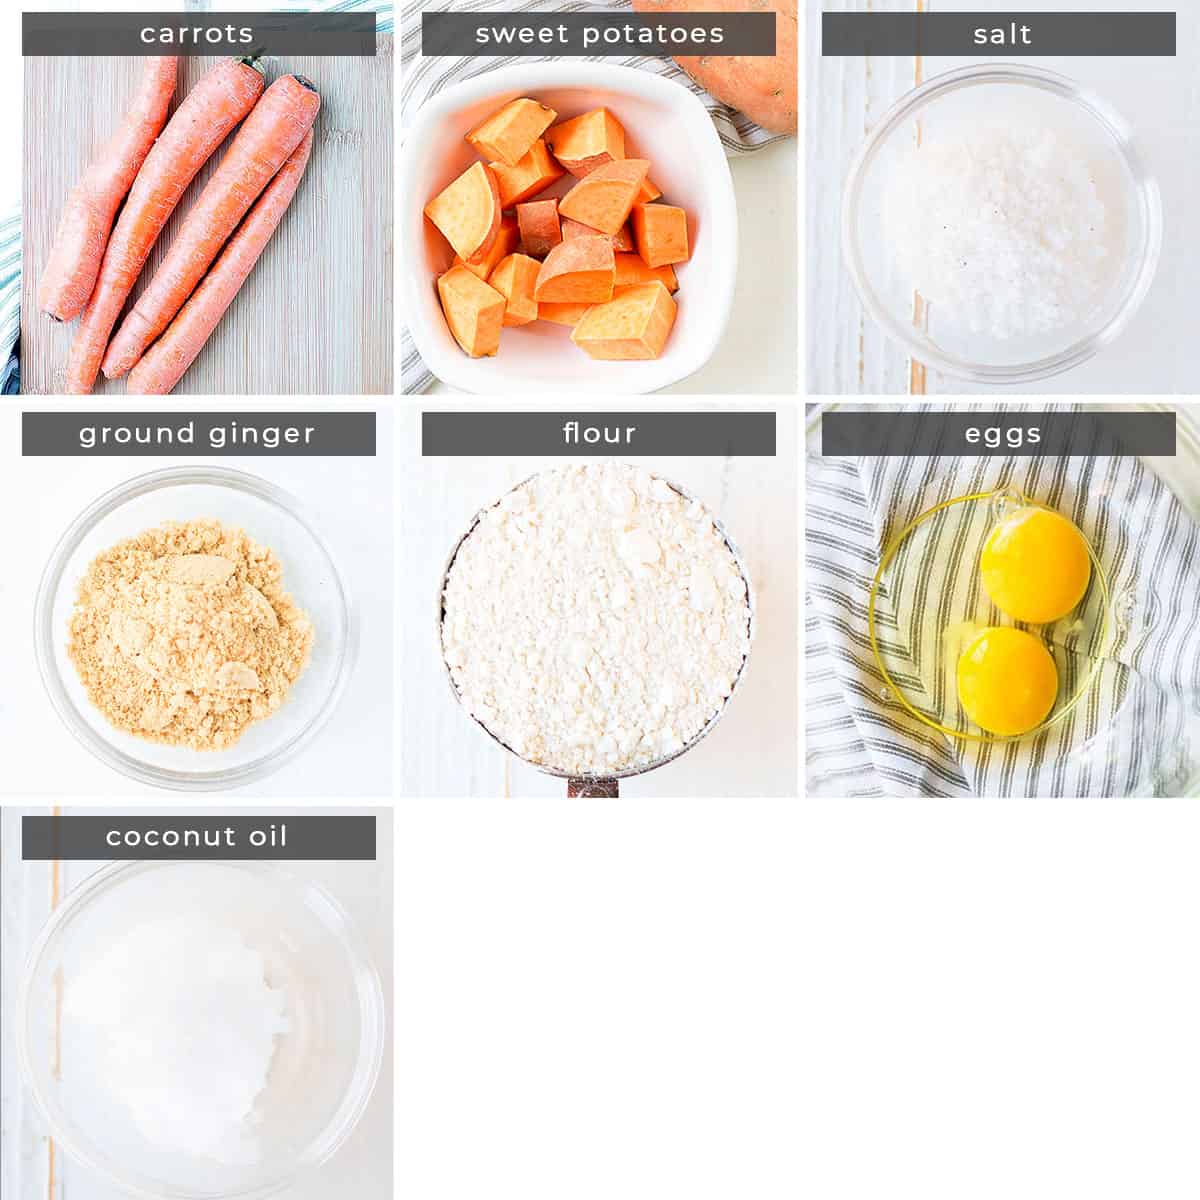 Image containing recipe ingredients carrots, sweet potatoes, salt, ground ginger, flour, eggs, and coconut oil.